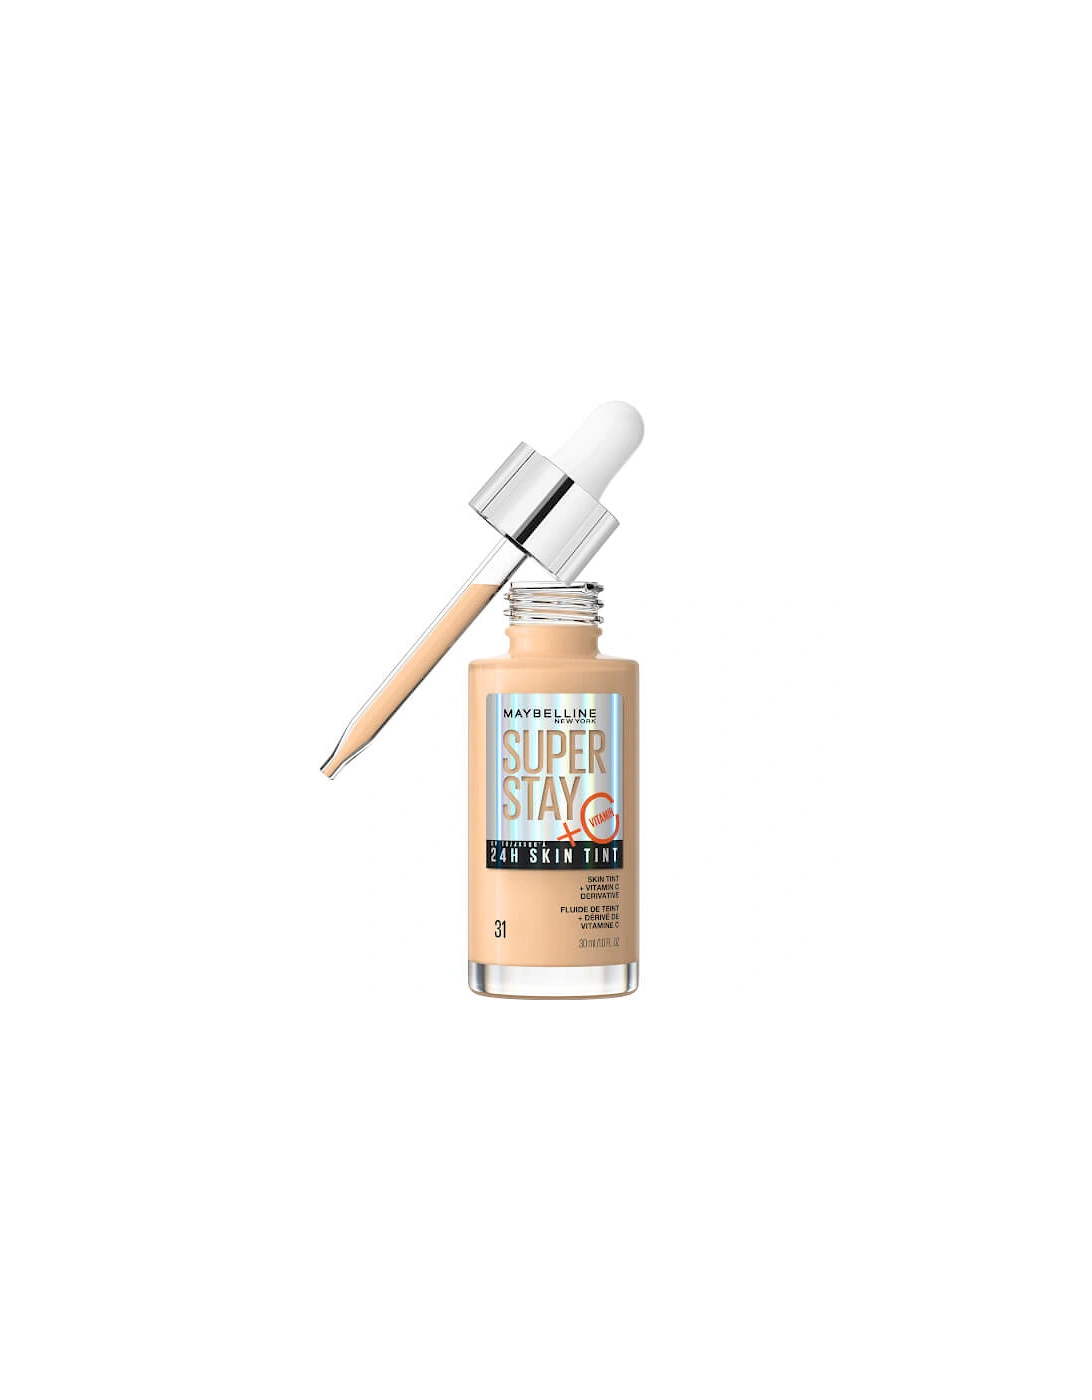 Super Stay up to 24H Skin Tint Foundation + Vitamin C - Shade 31, 2 of 1